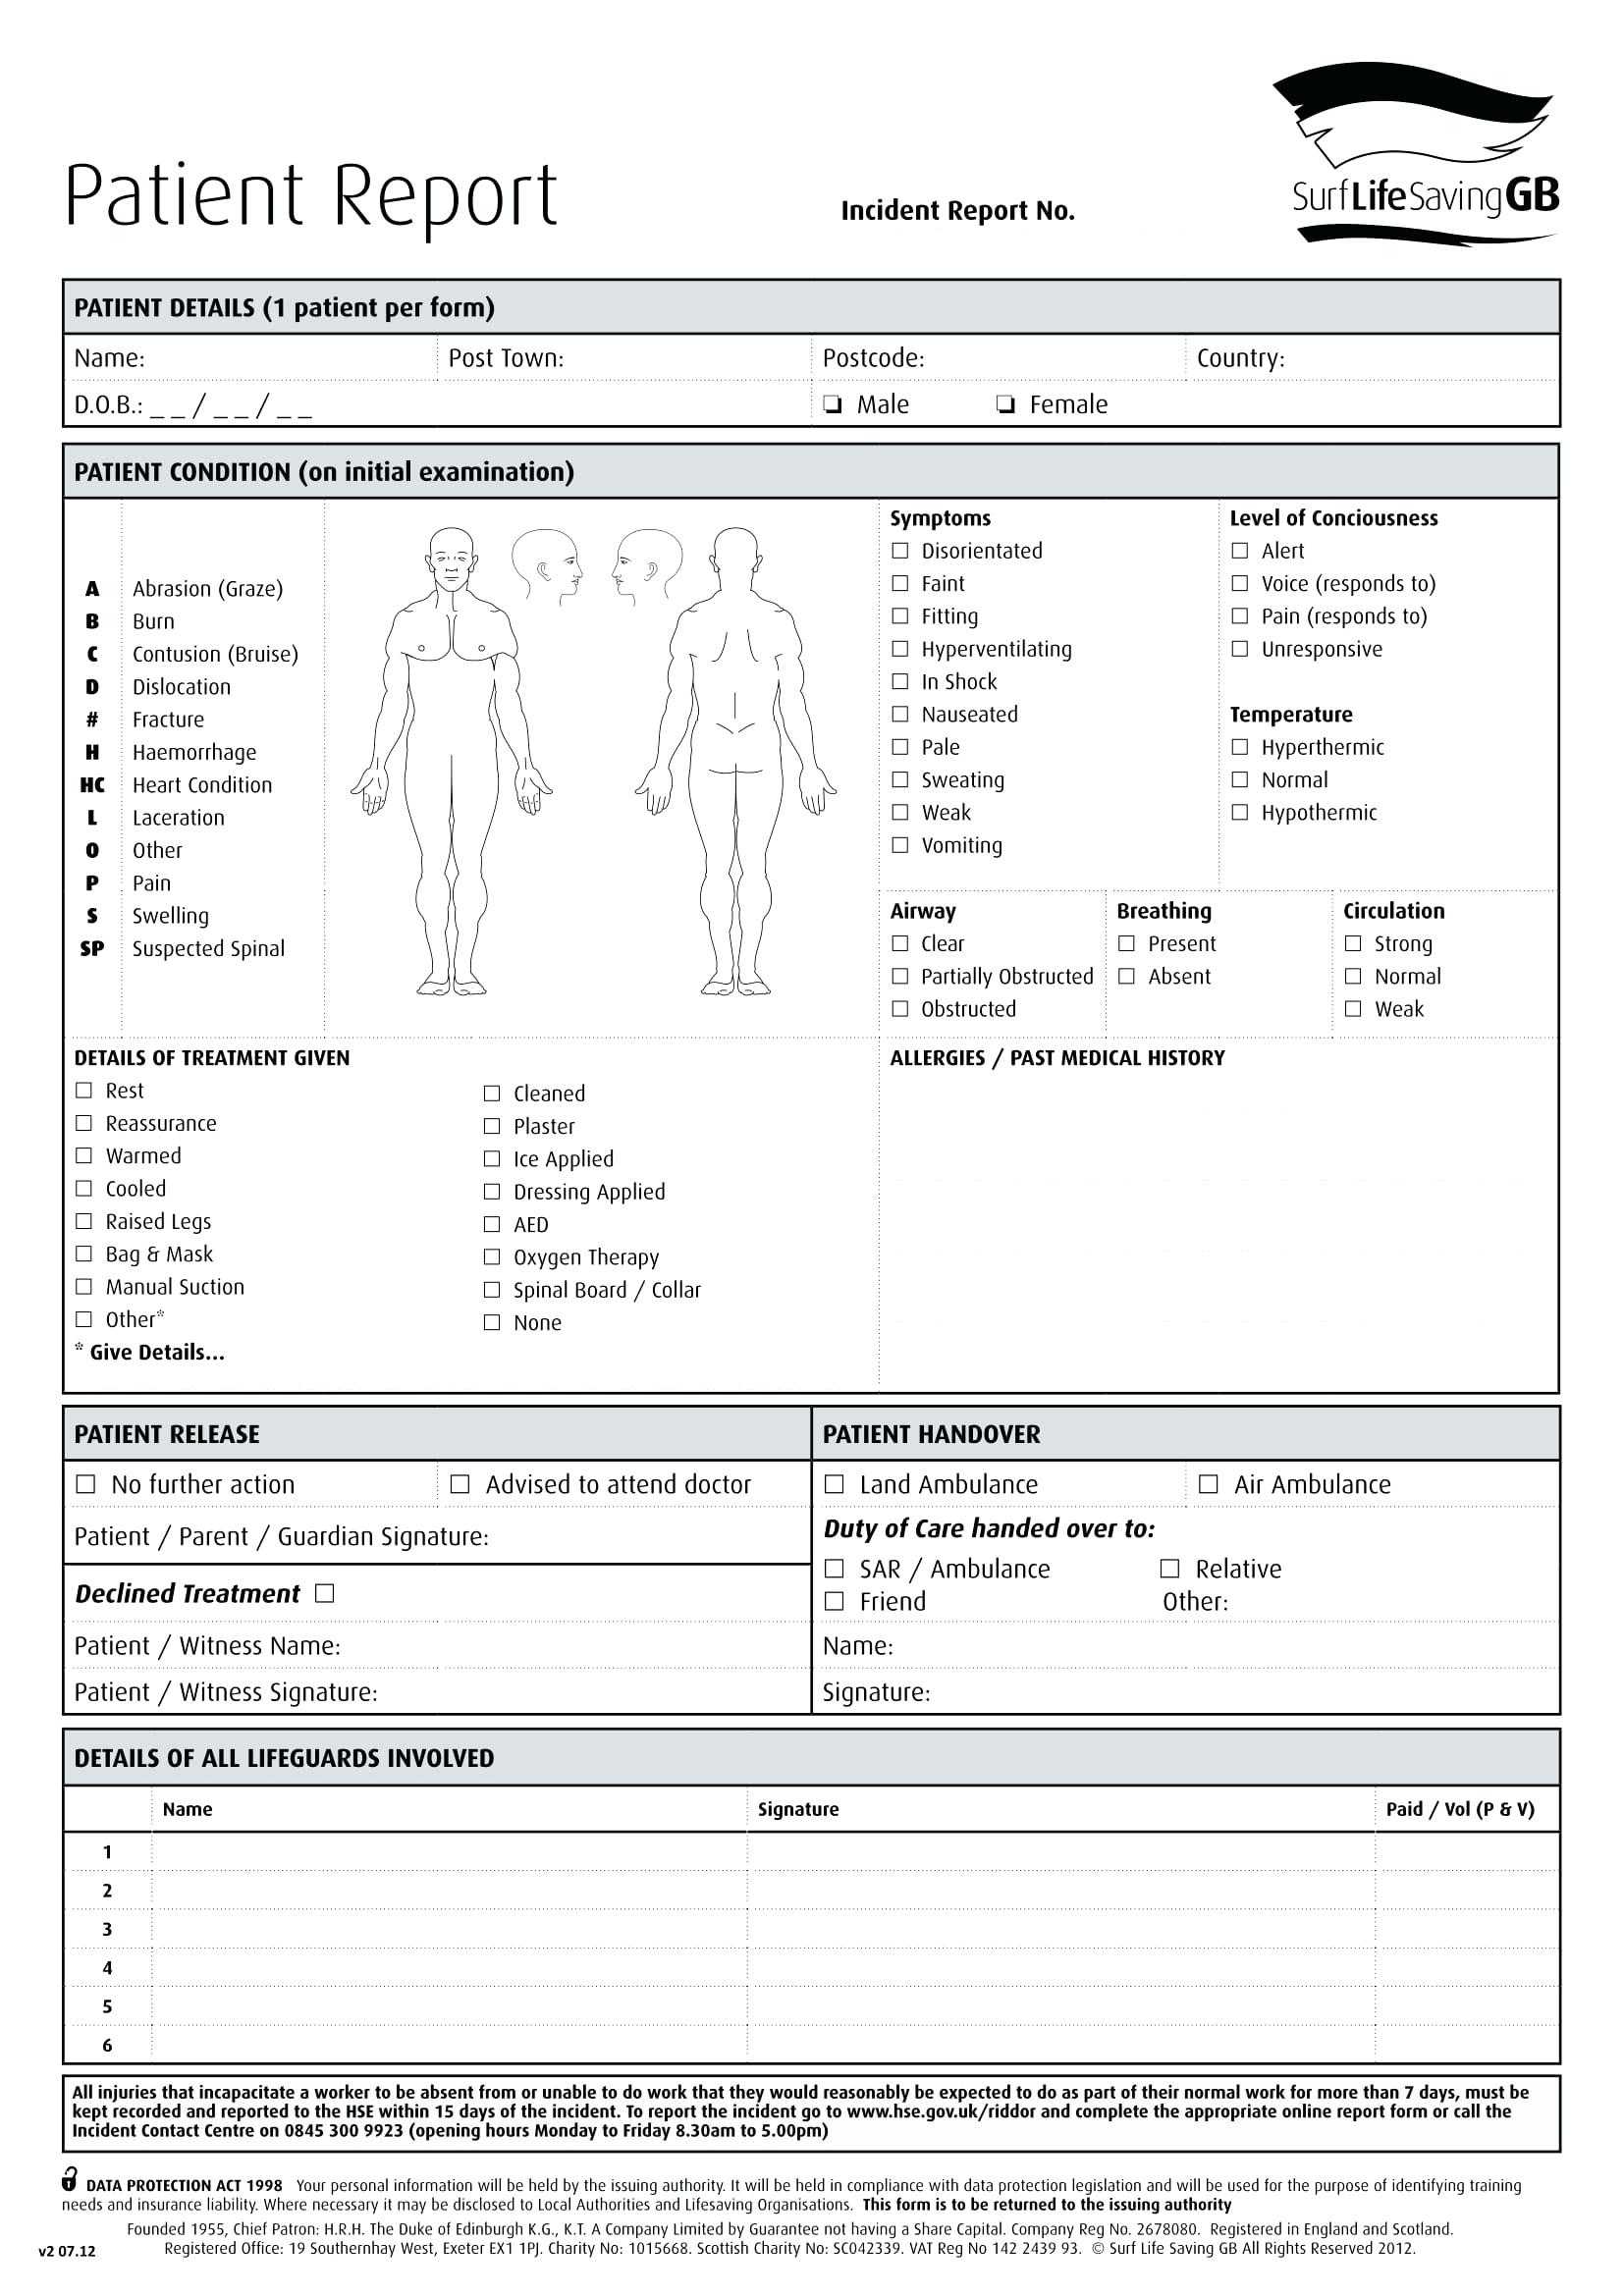 Incident Report Form Template Free Download – Vmarques Intended For Incident Report Template Microsoft